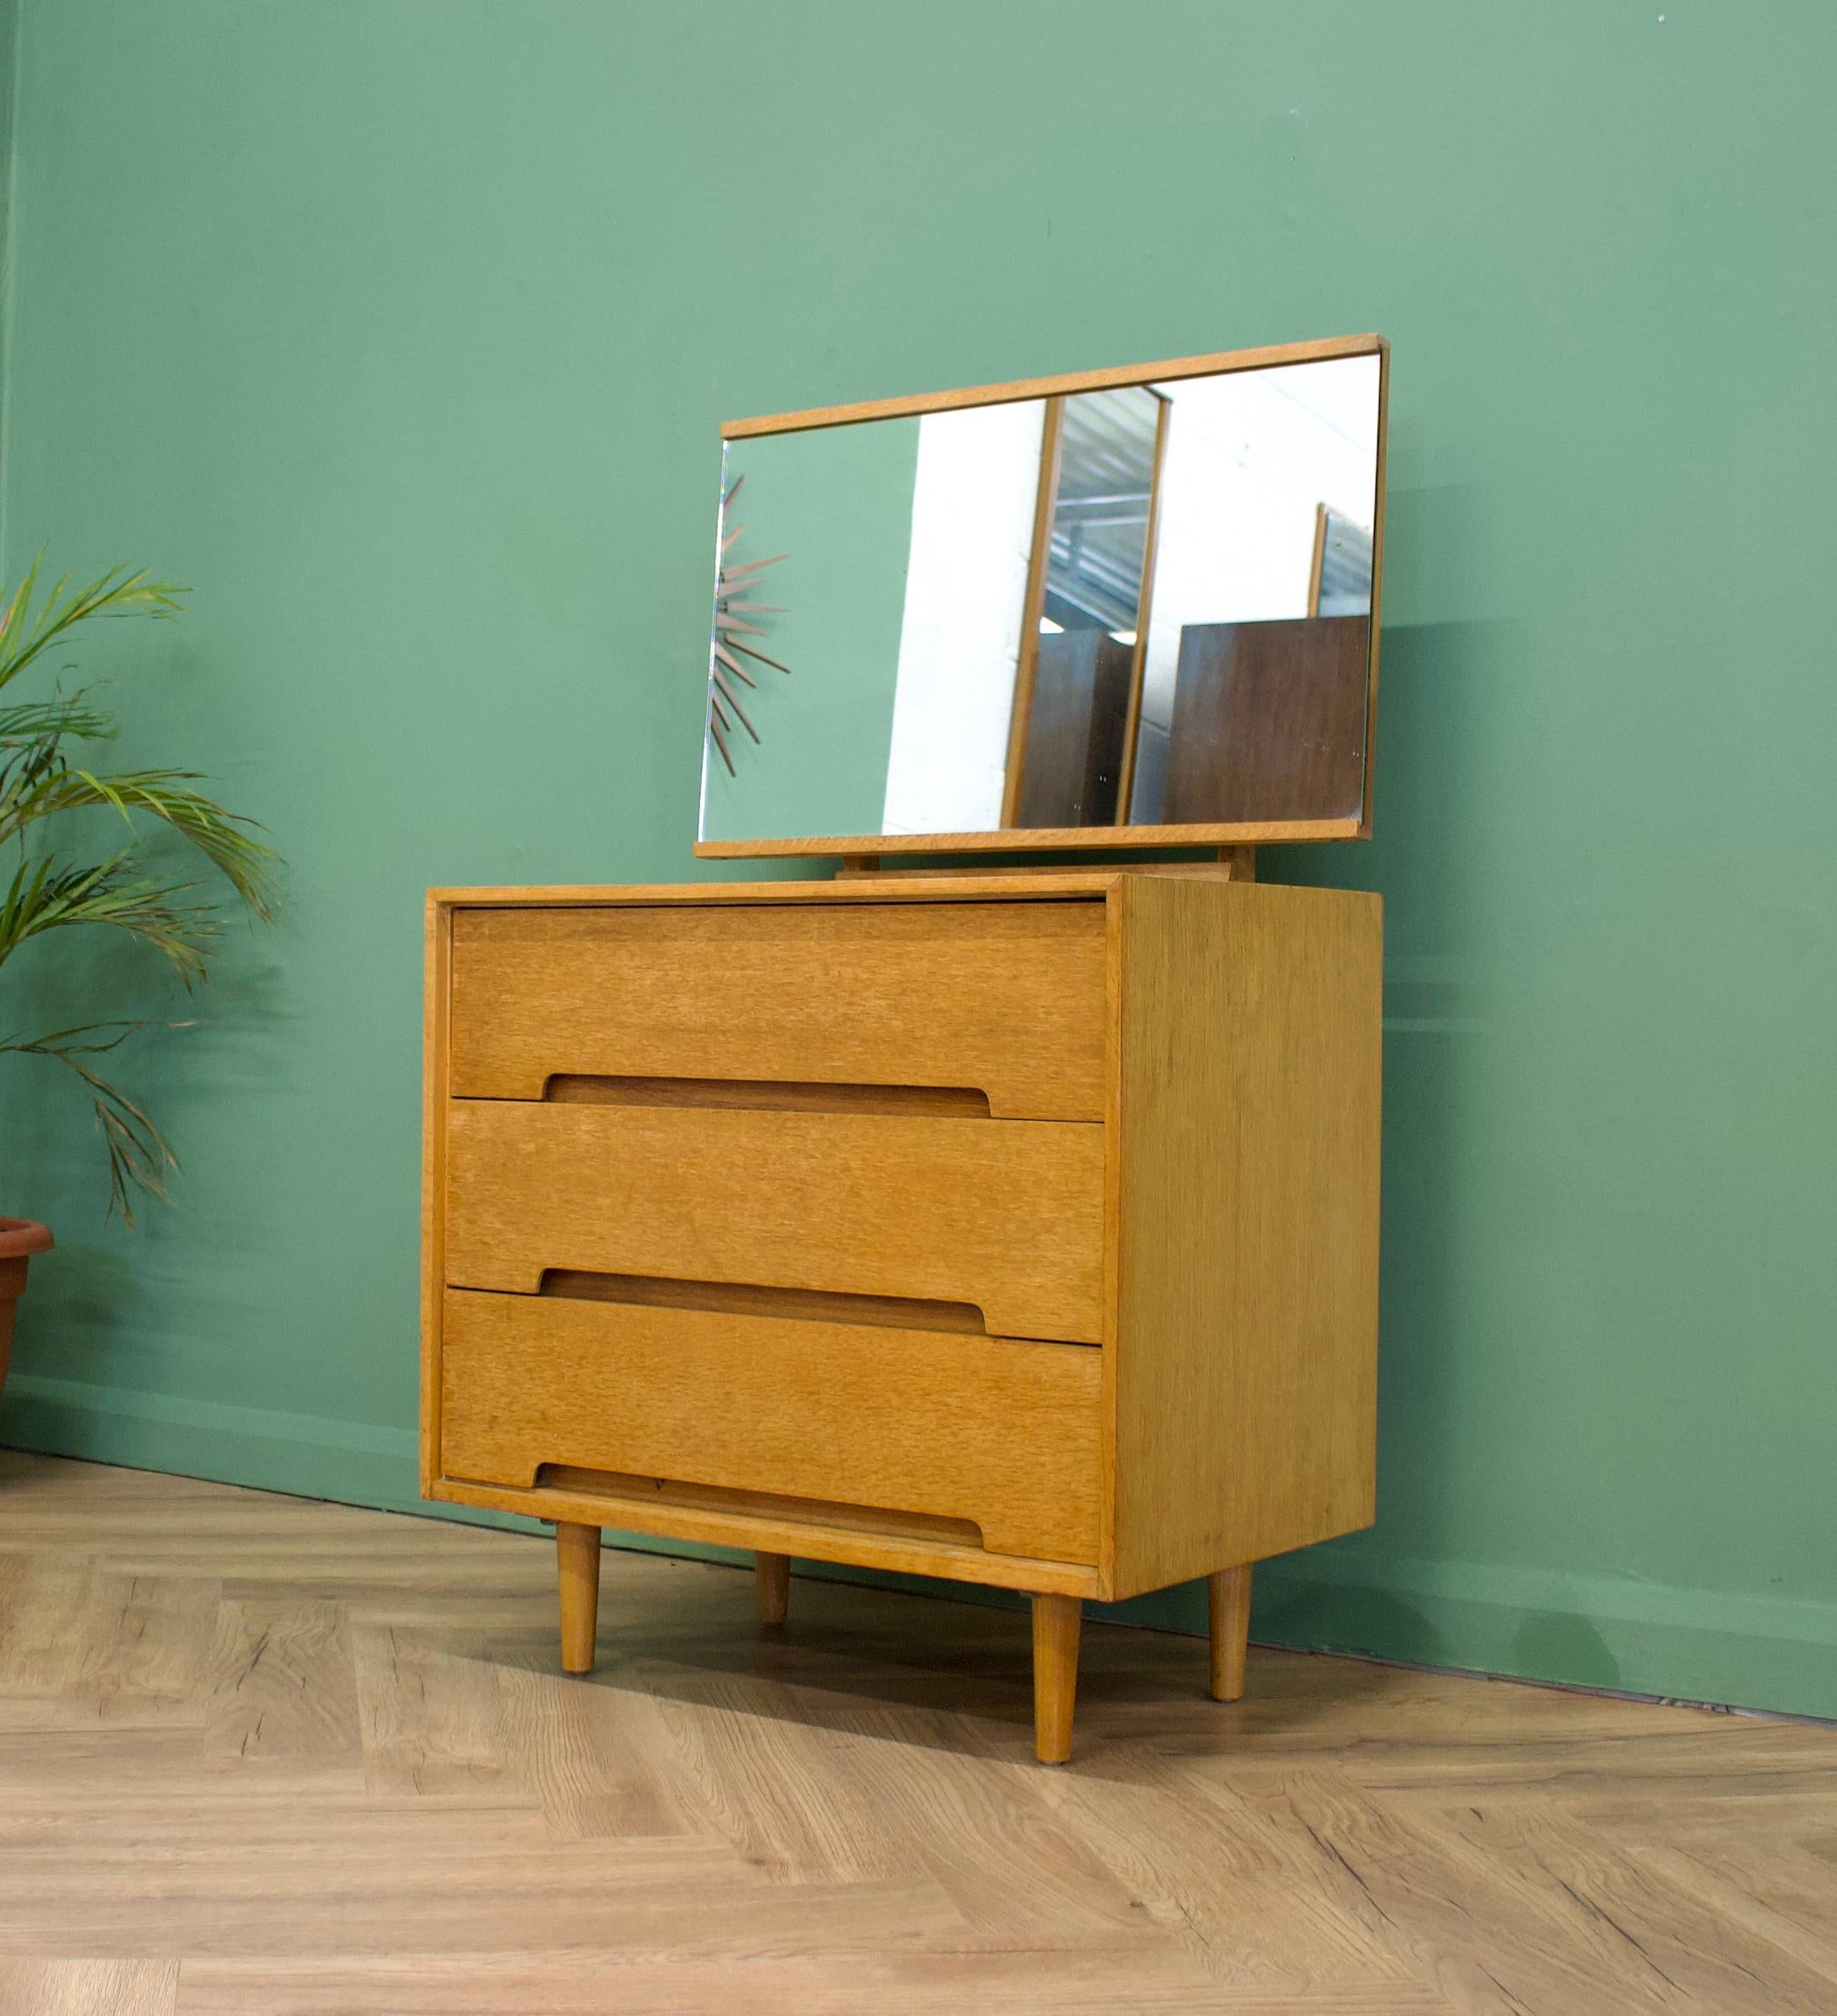 British Midcentury Oak Dressing Chest of Drawers by John & Sylvia Reid for Stag, 1950s